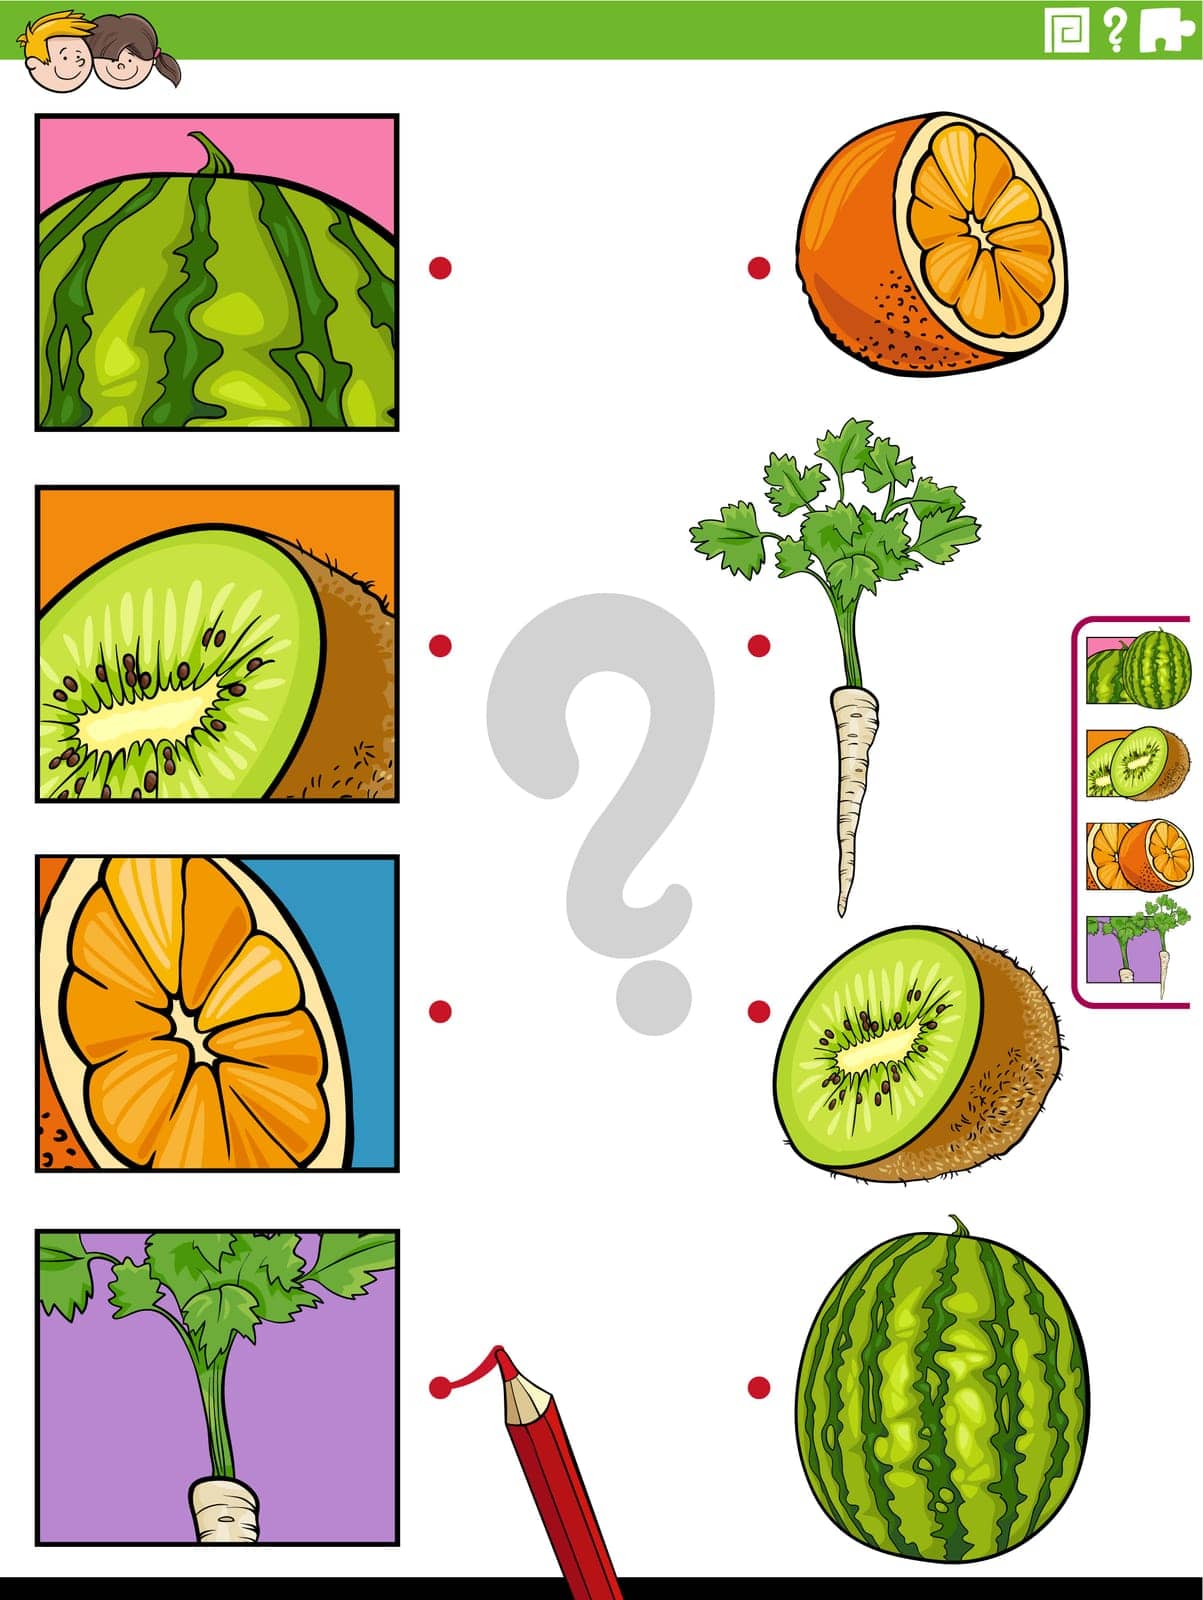 match cartoon fruit and vegetables and clippings educational game by izakowski